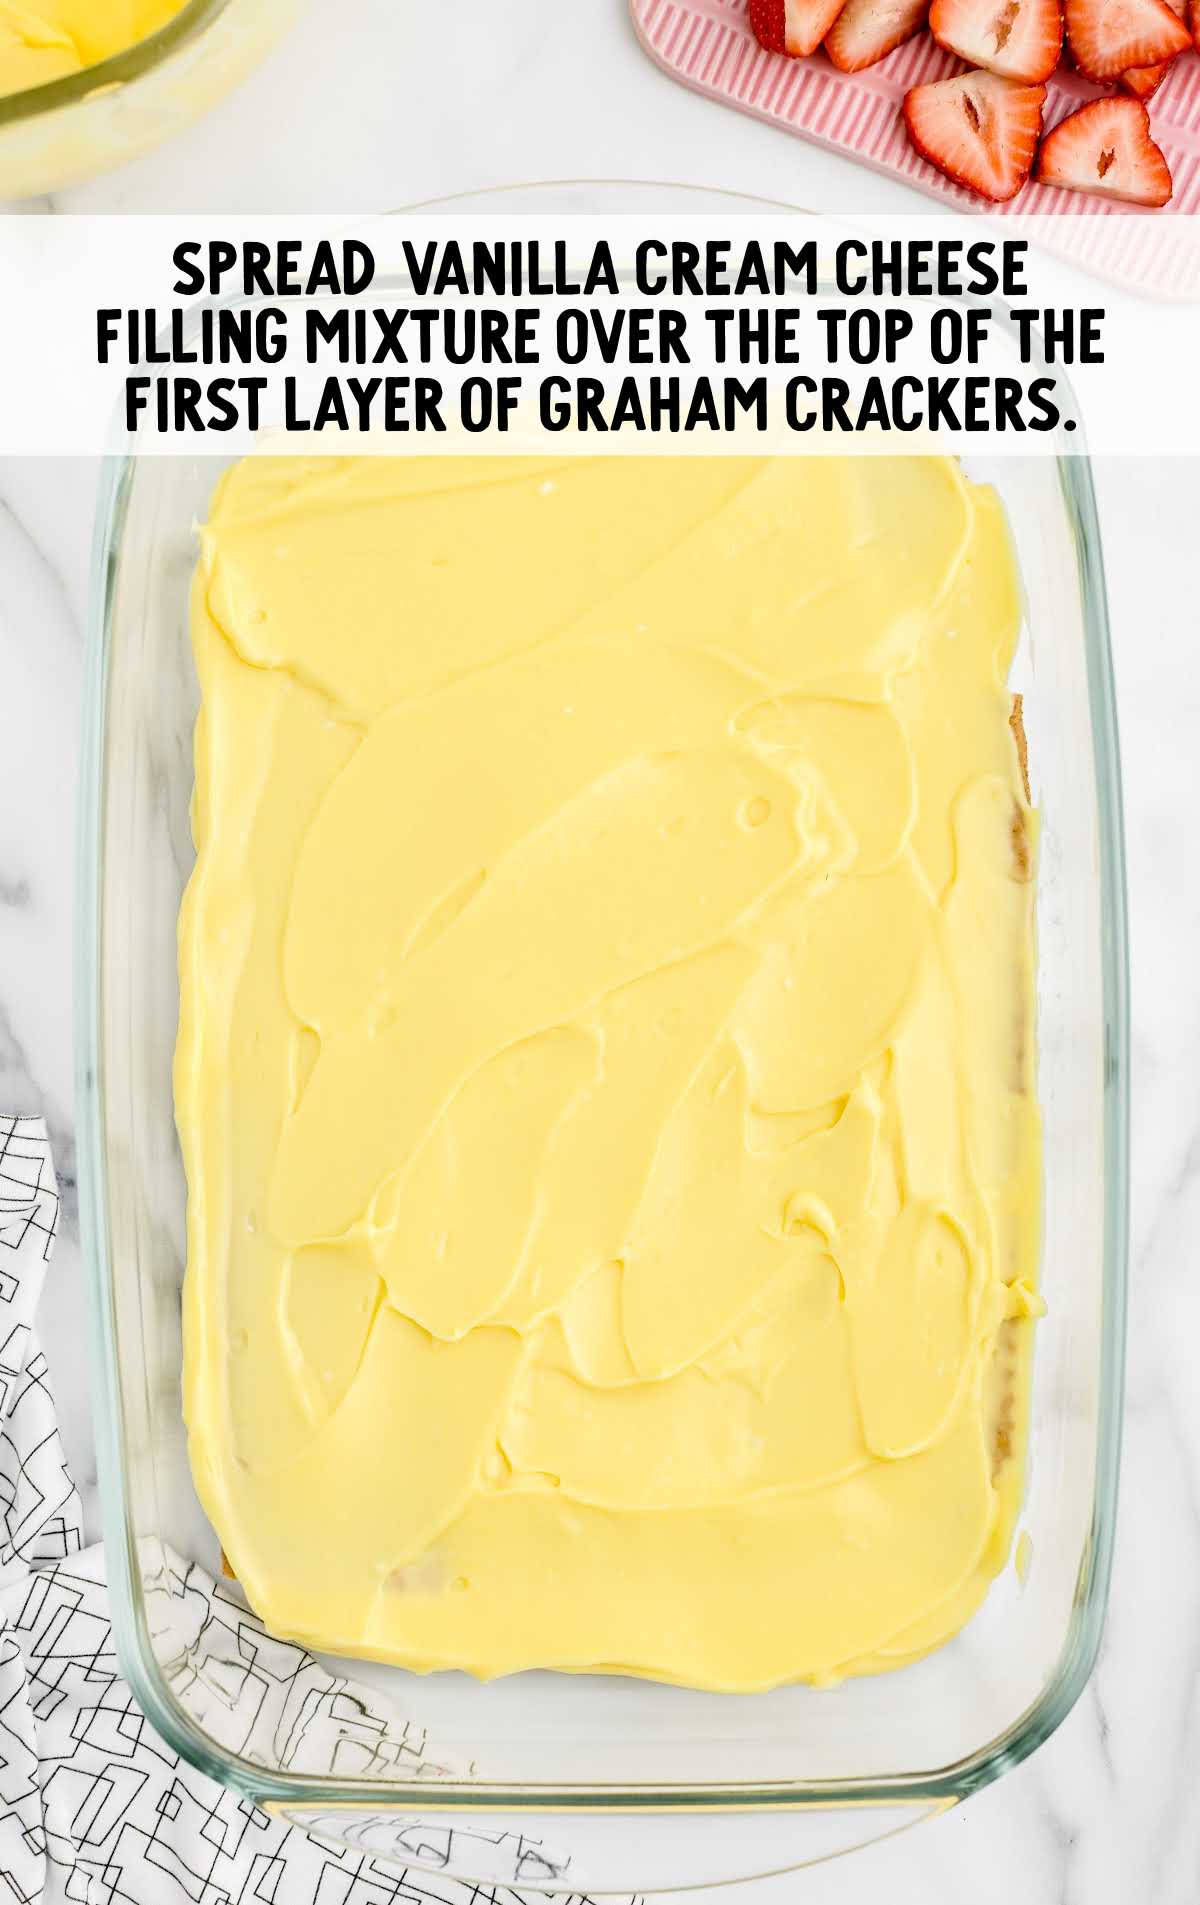 vanilla cream cheese filling mixture spread over the first graham cracker in a baking dish